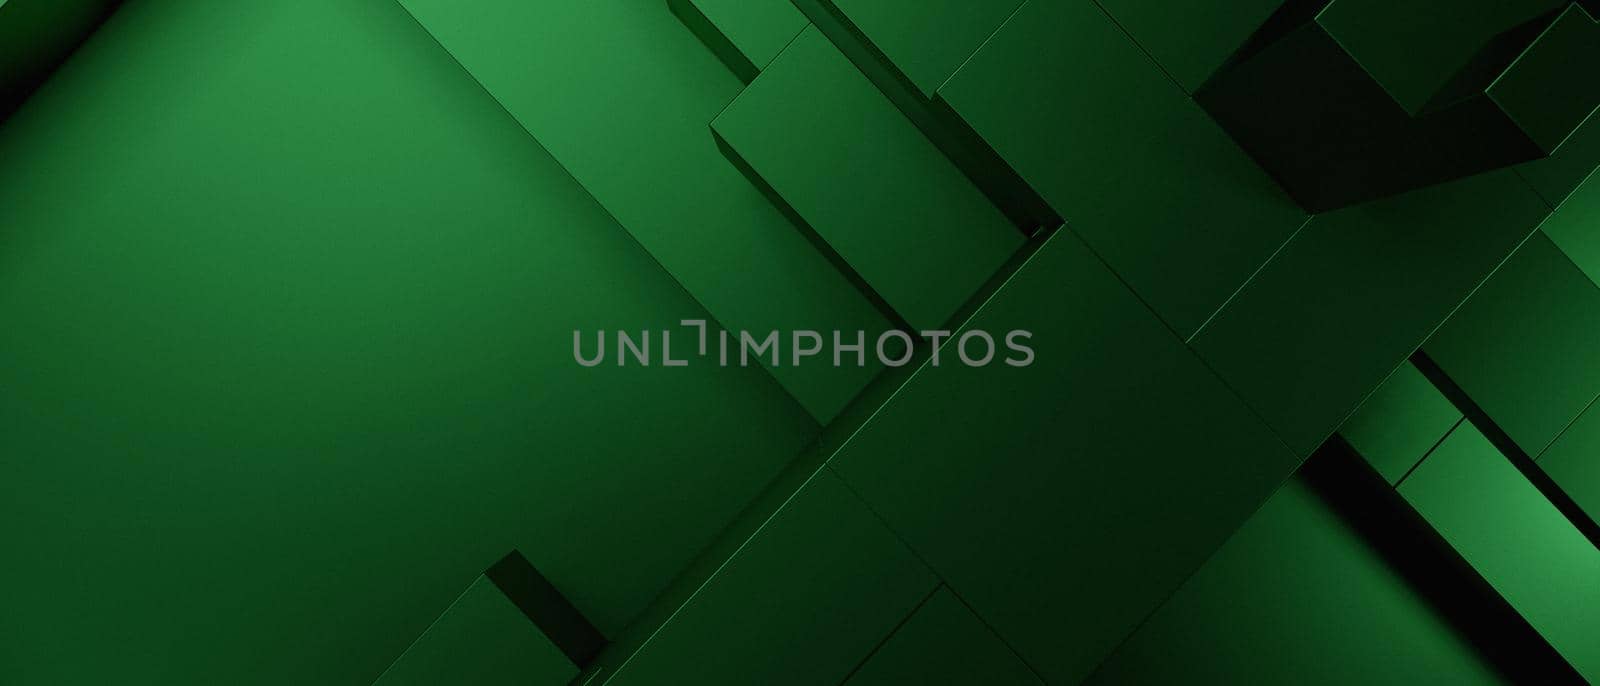 Abstract Luxurious Elegant Futuristic Block Cubes Three Dimensional Green Abstract Background 3D Render by yay_lmrb